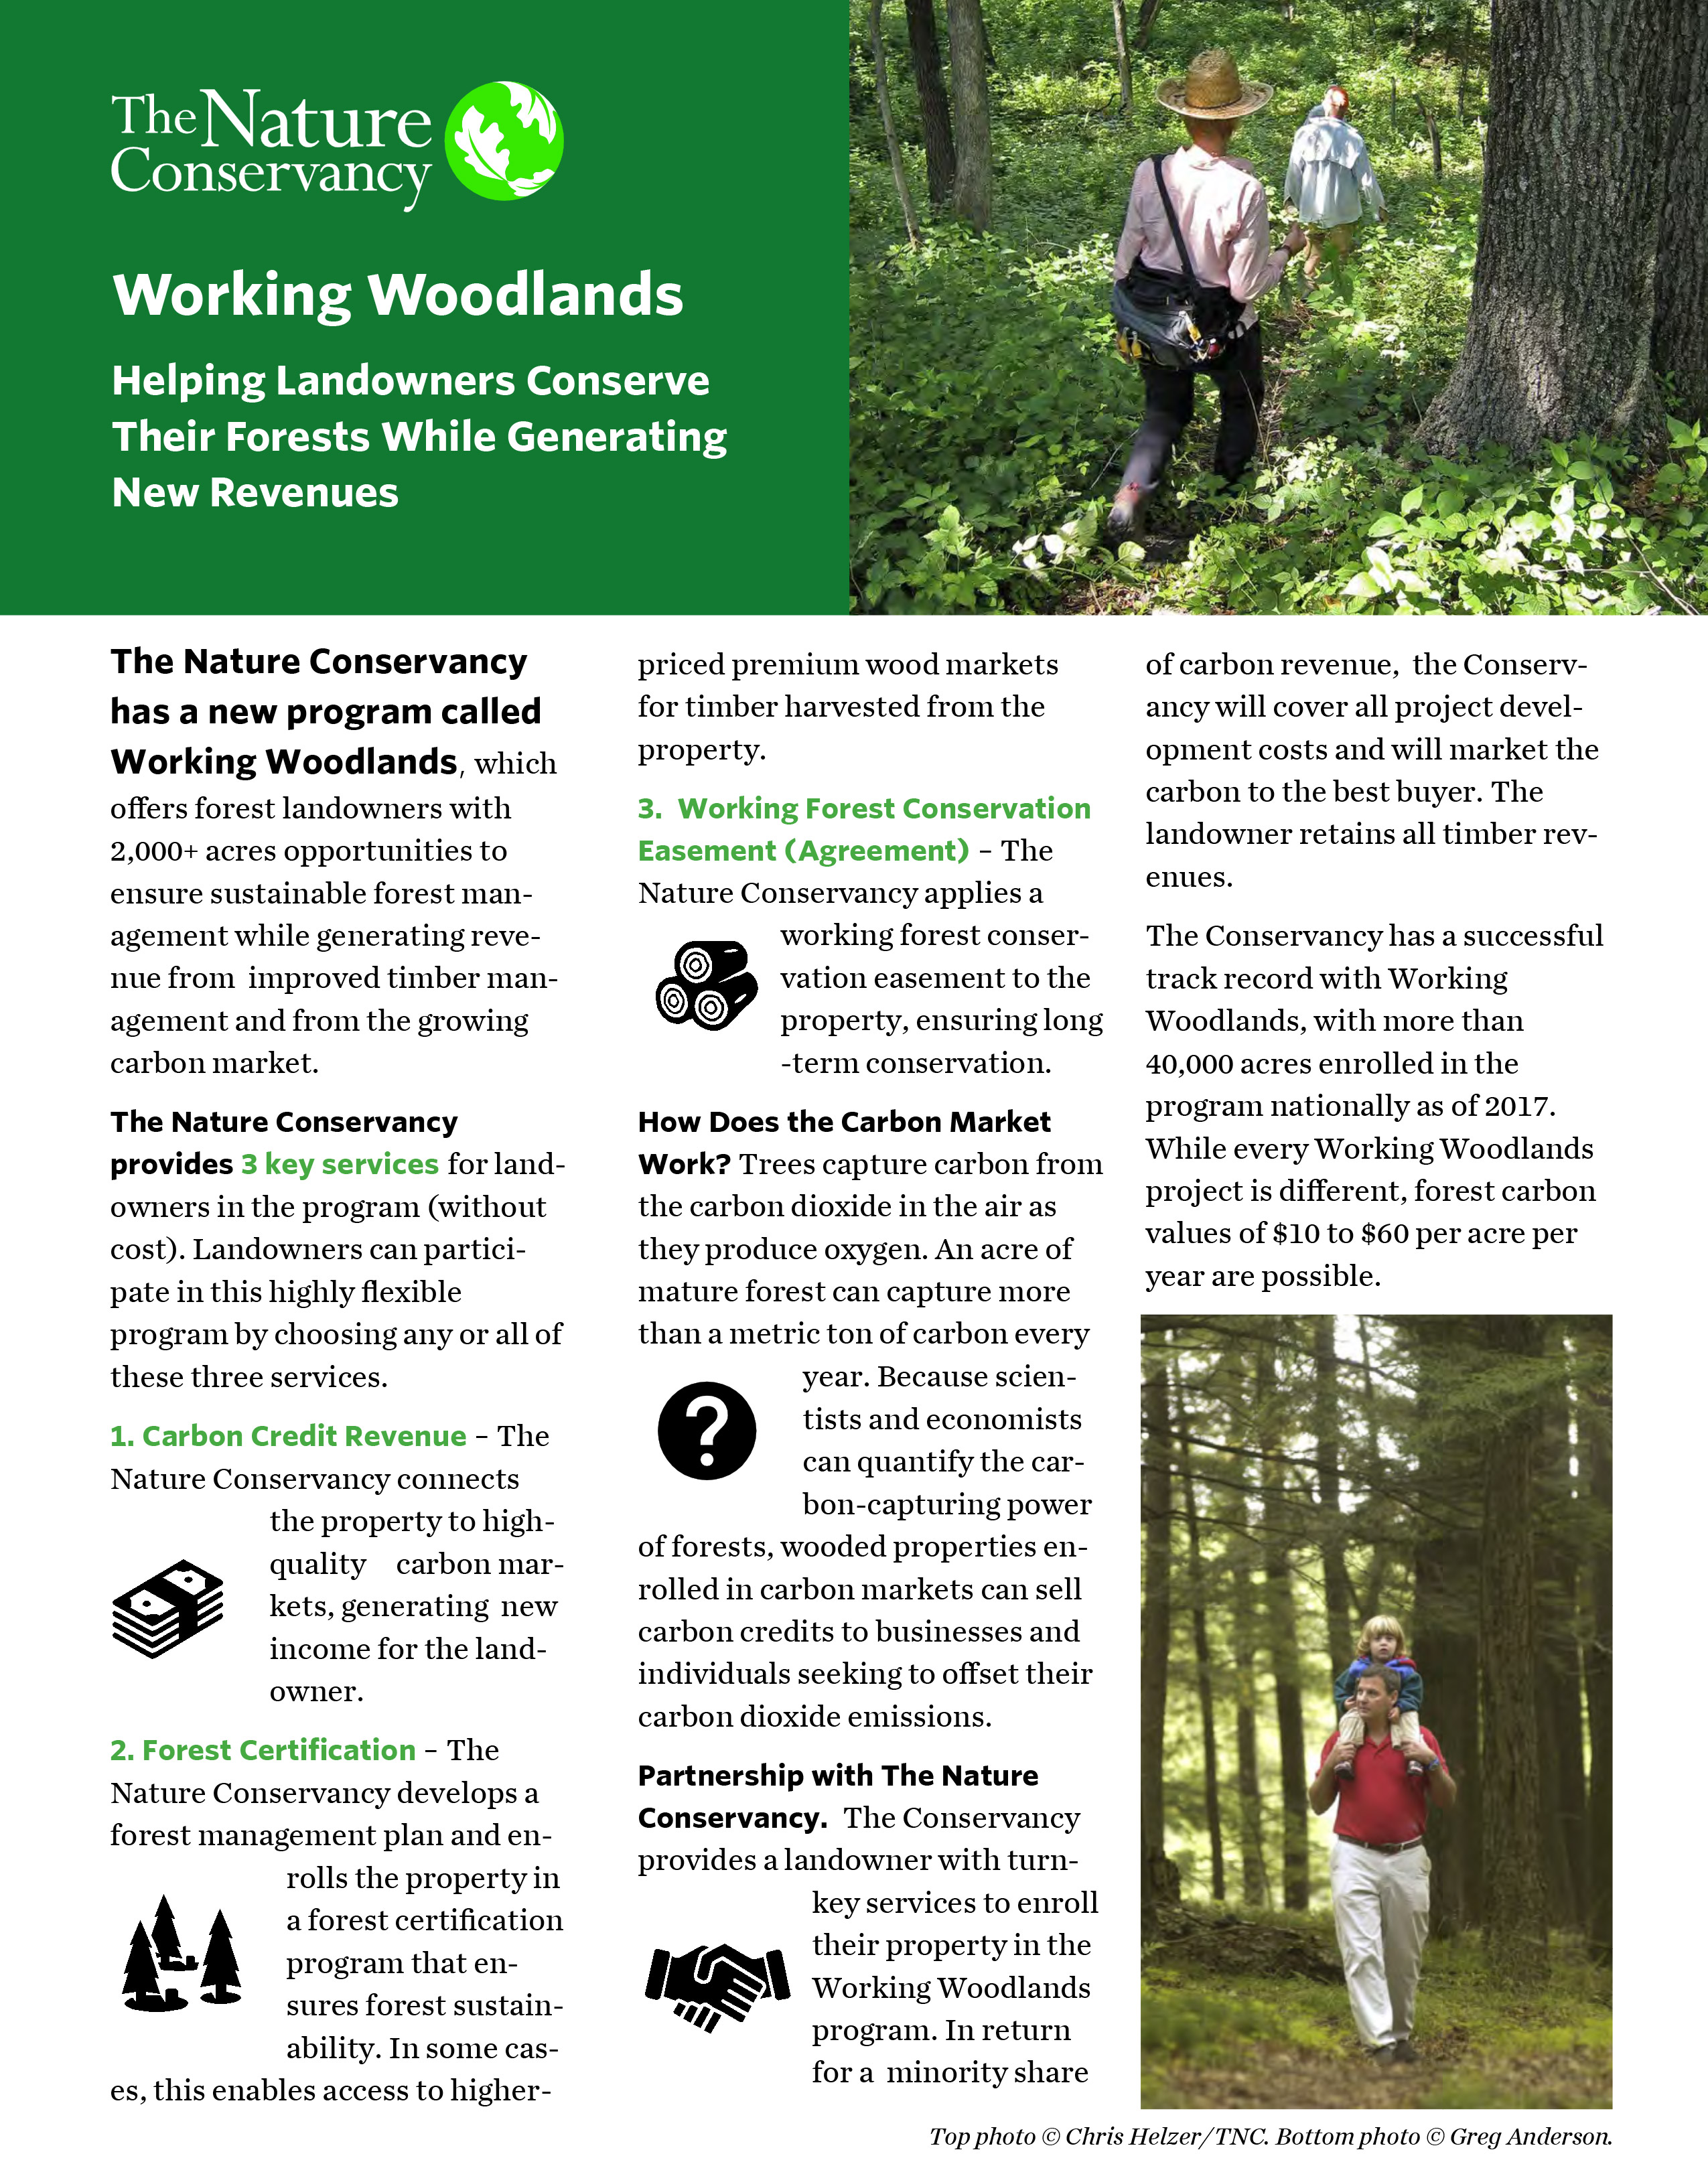 Cover of the Working Woodlands brochure.